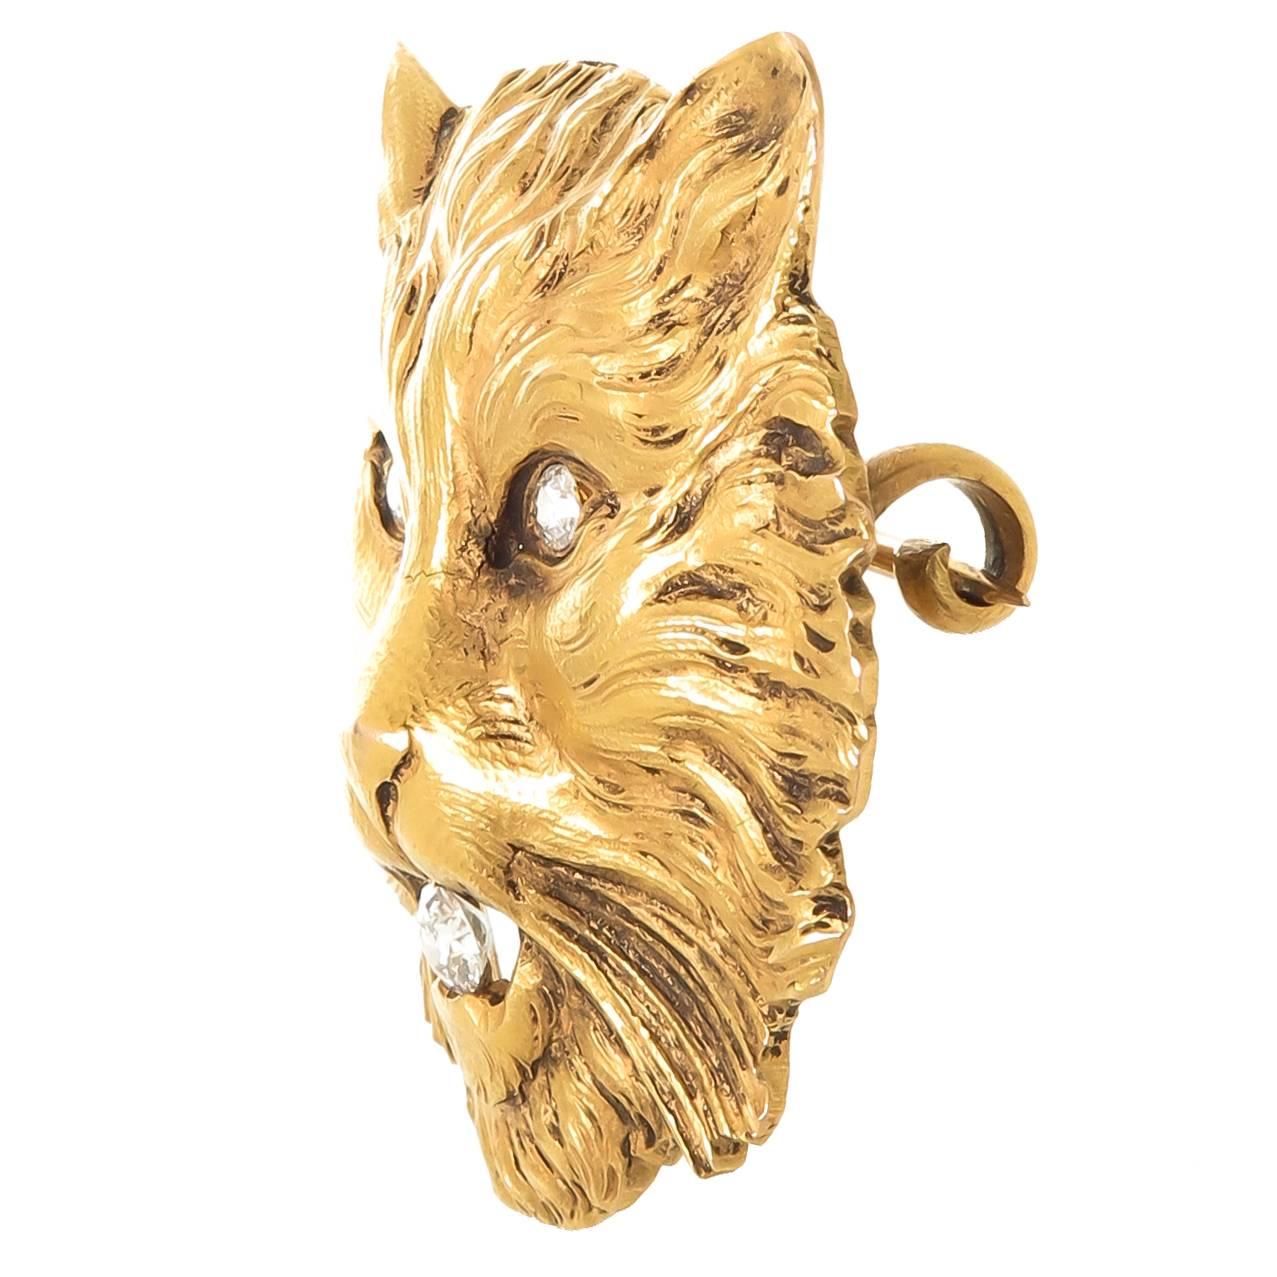 Circa 1910 18K yellow Gold Cat brooch, measuring 1 3/4 X 1 5/8 inch and weighing 33.5 Grams. The piece is finely finished with hand chased workmanship and set with Old Mine cut Diamonds totaling .35 Carat. 